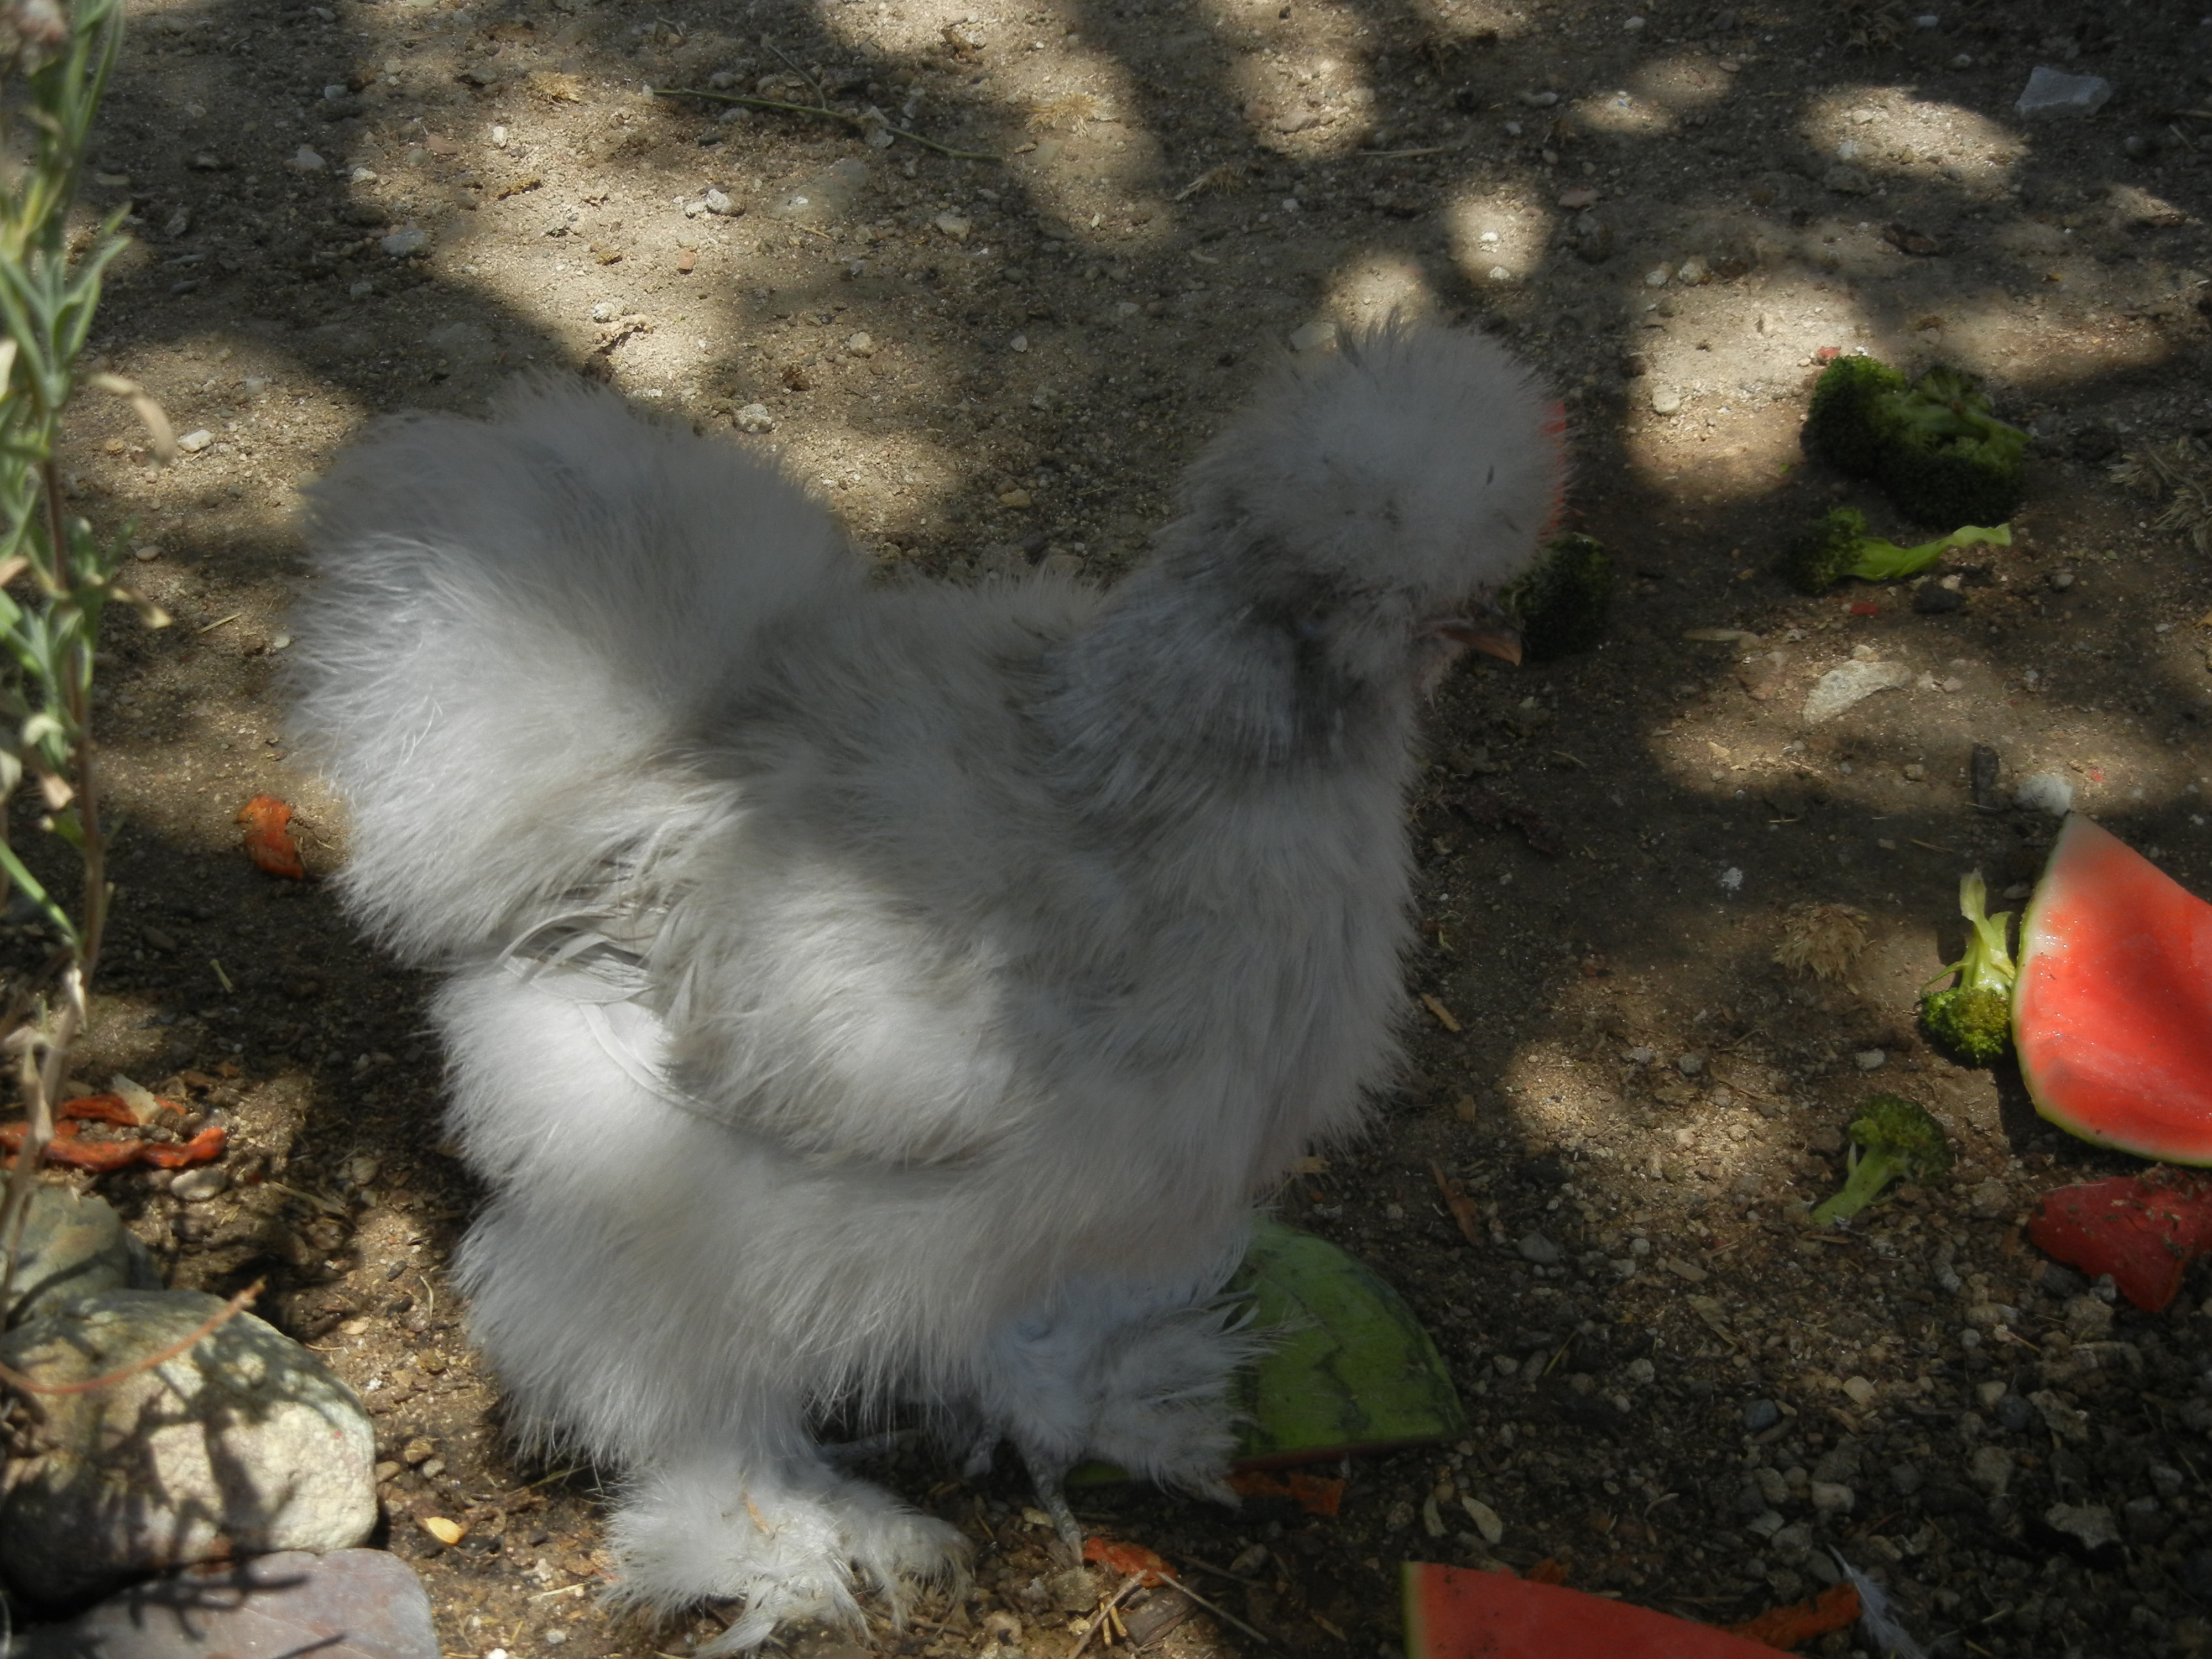 4 month old lavender, I believe it is a hen